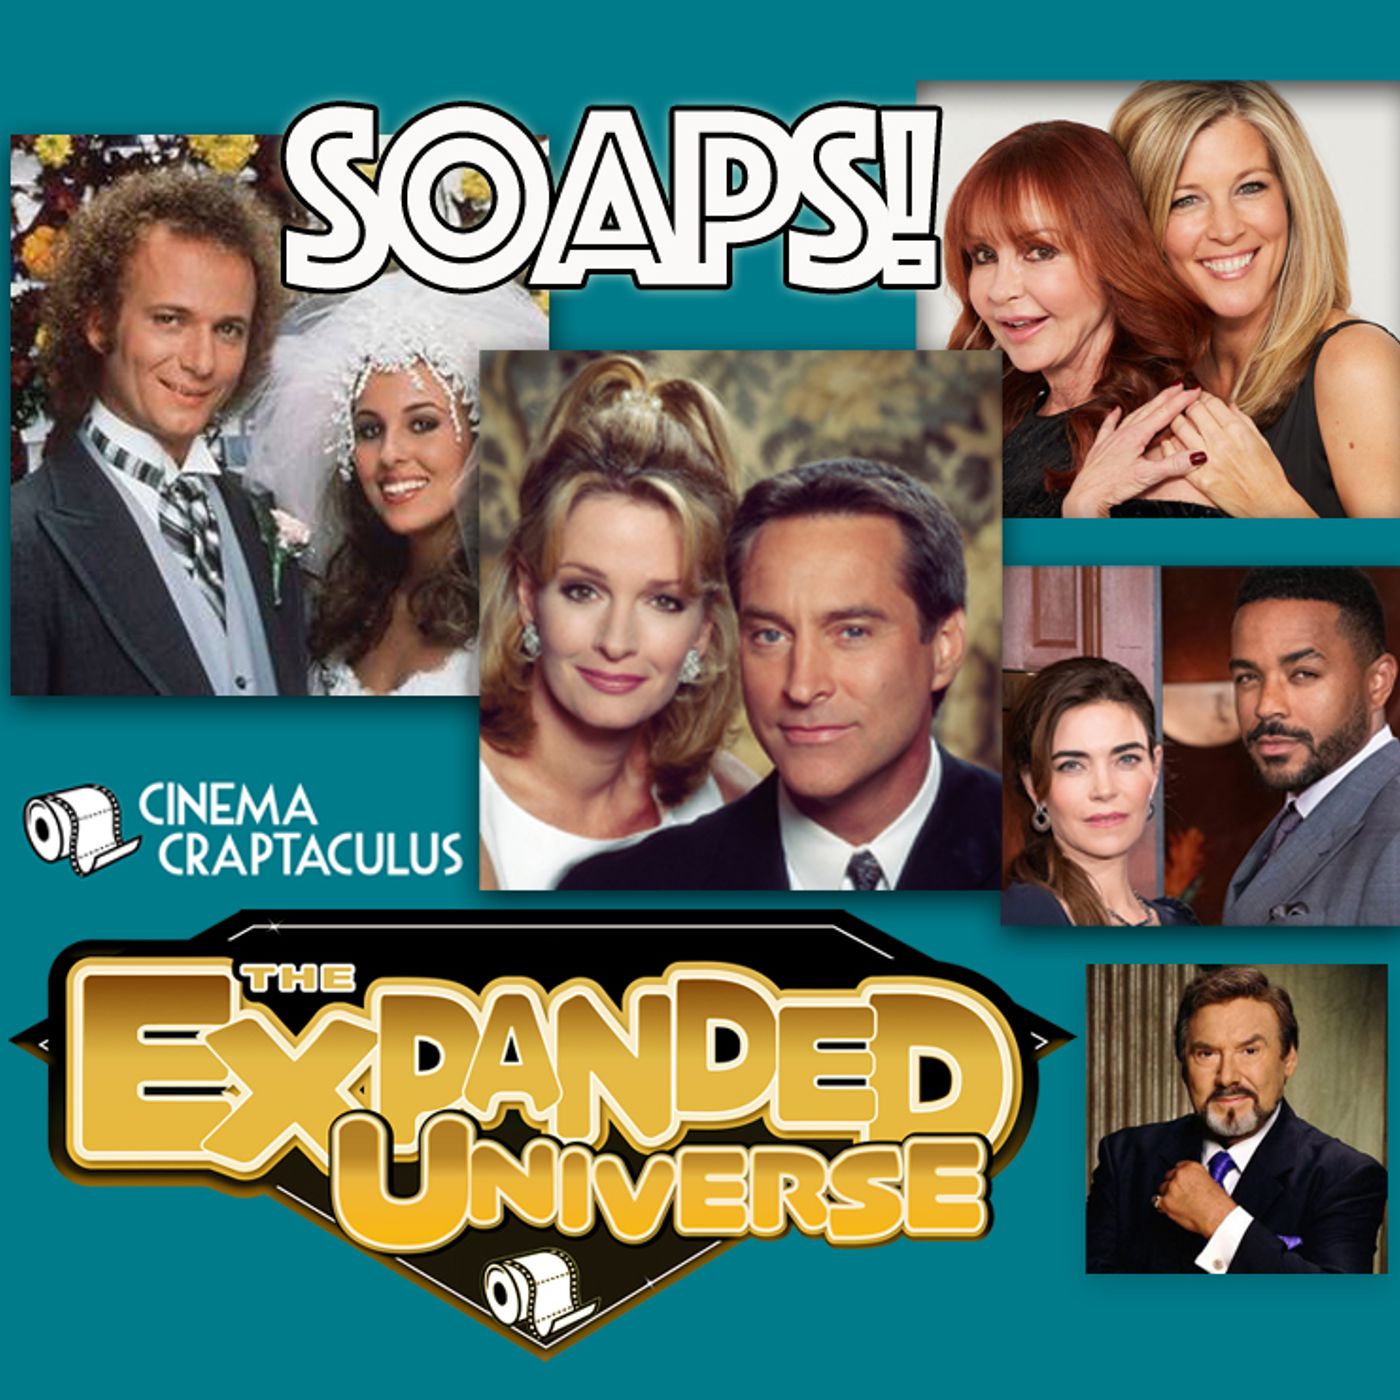 "Soaps" EXPANDED UNIVERSE 36